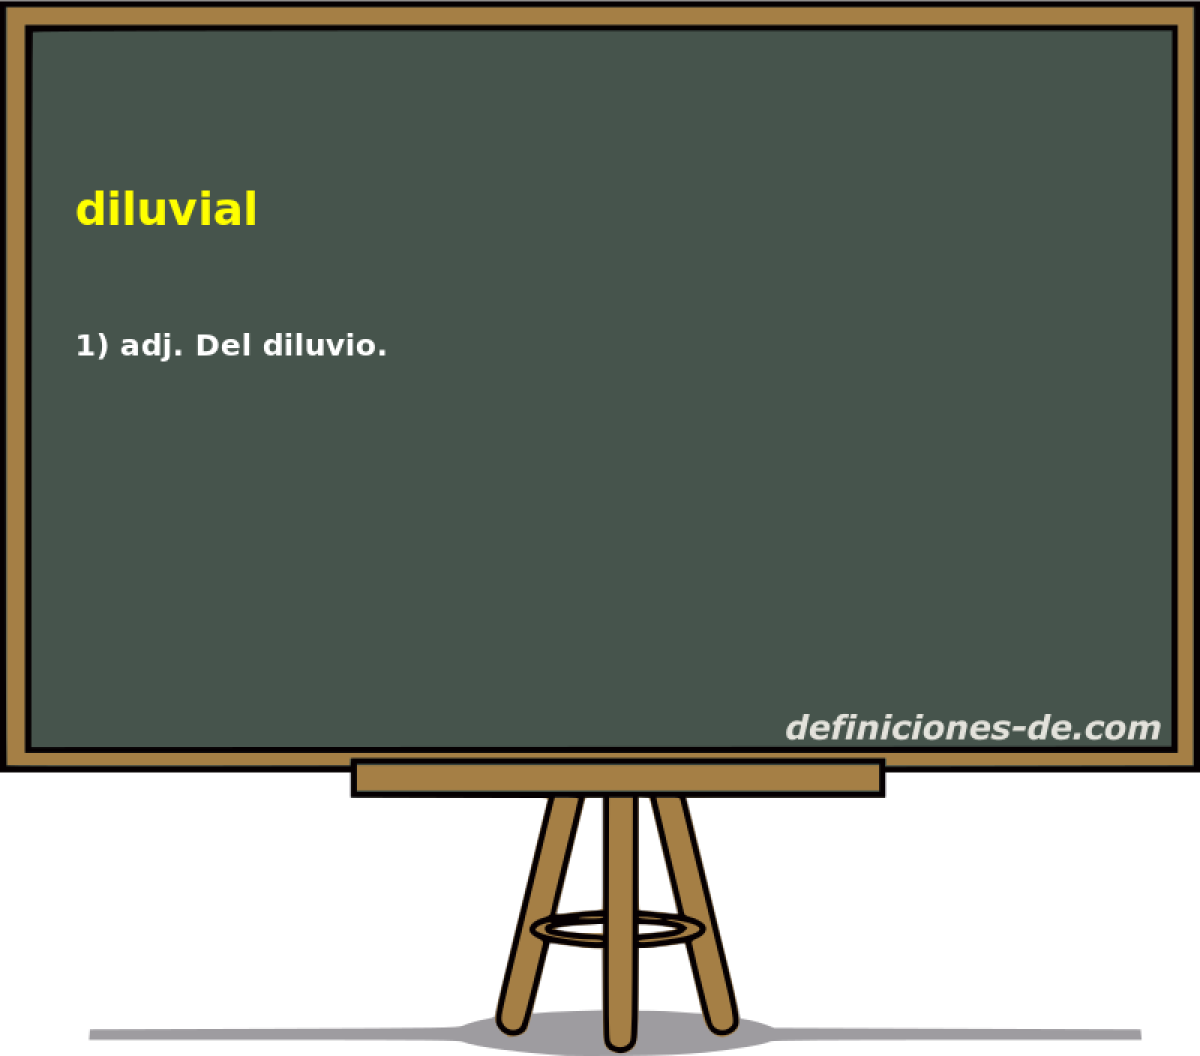 diluvial 